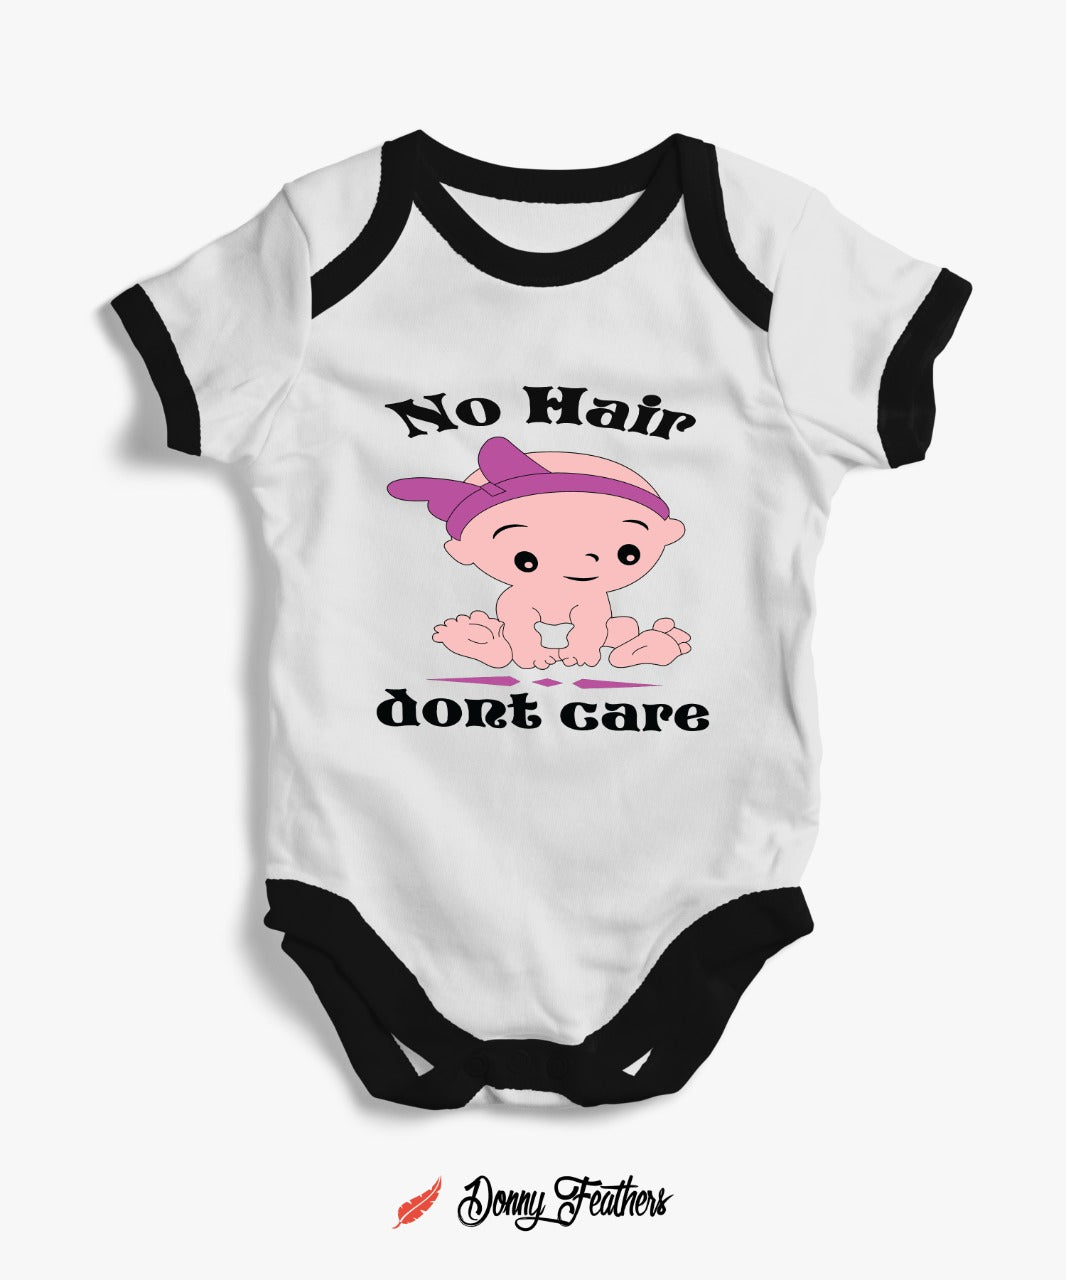 Baby Boys Rompers | No Hair Don't Care Baby Romper (White & Black) By: Donny Feathers